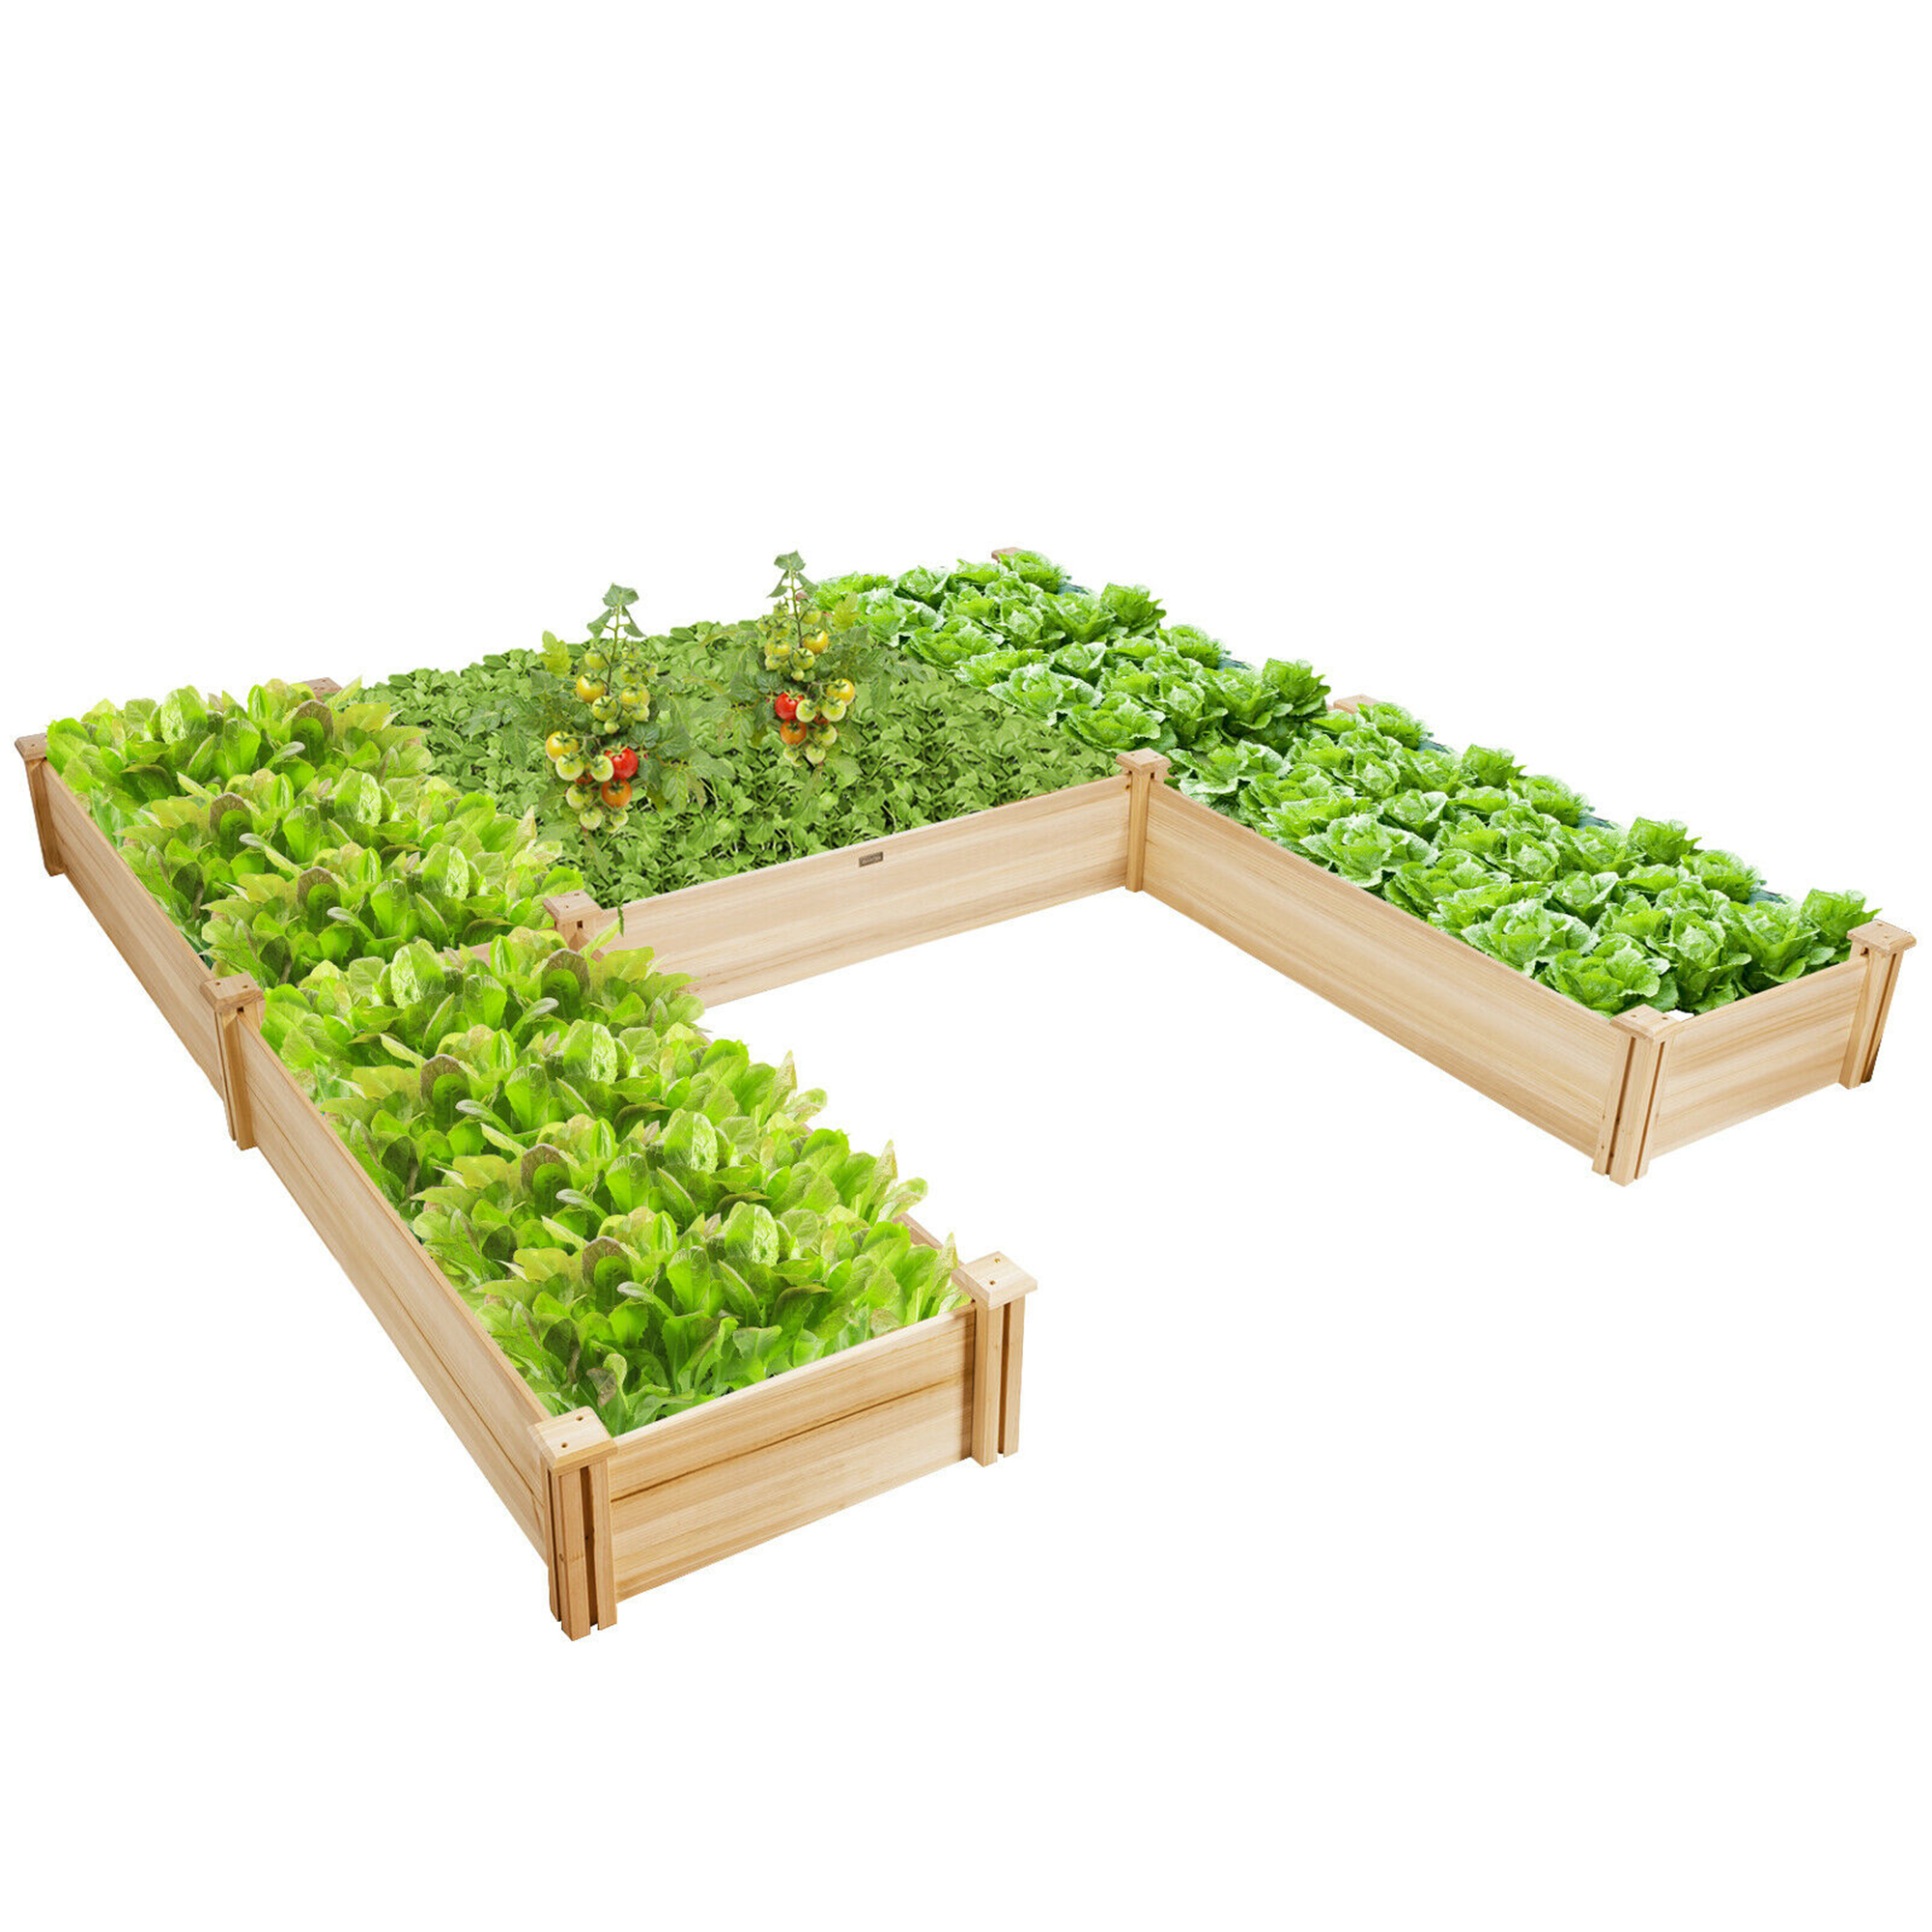 Gymax Raised Garden Bed 92.5x95x11in Wooden Garden Box Planter Container U-Shaped Bed - image 1 of 10